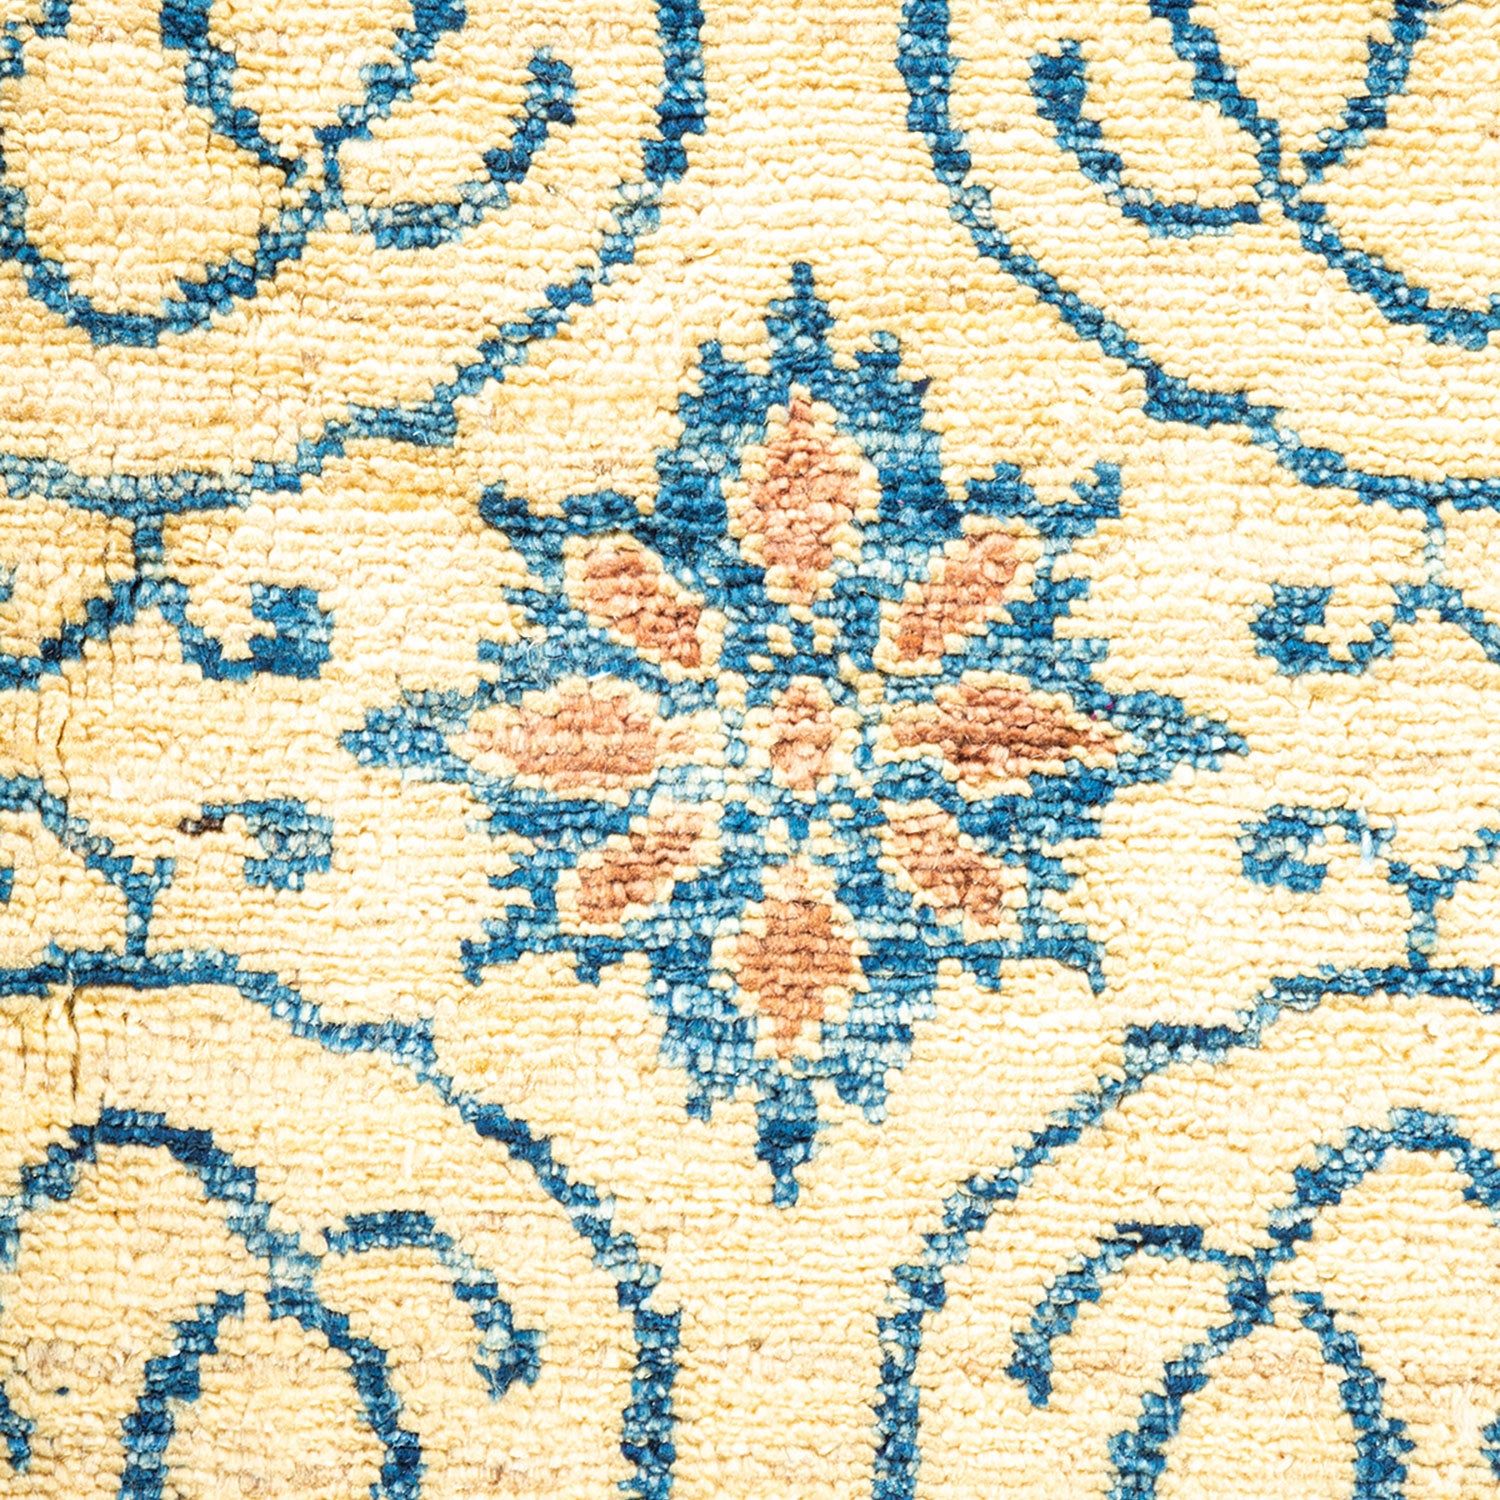 Close-up view of a plush, nubby textile with symmetrical floral pattern.